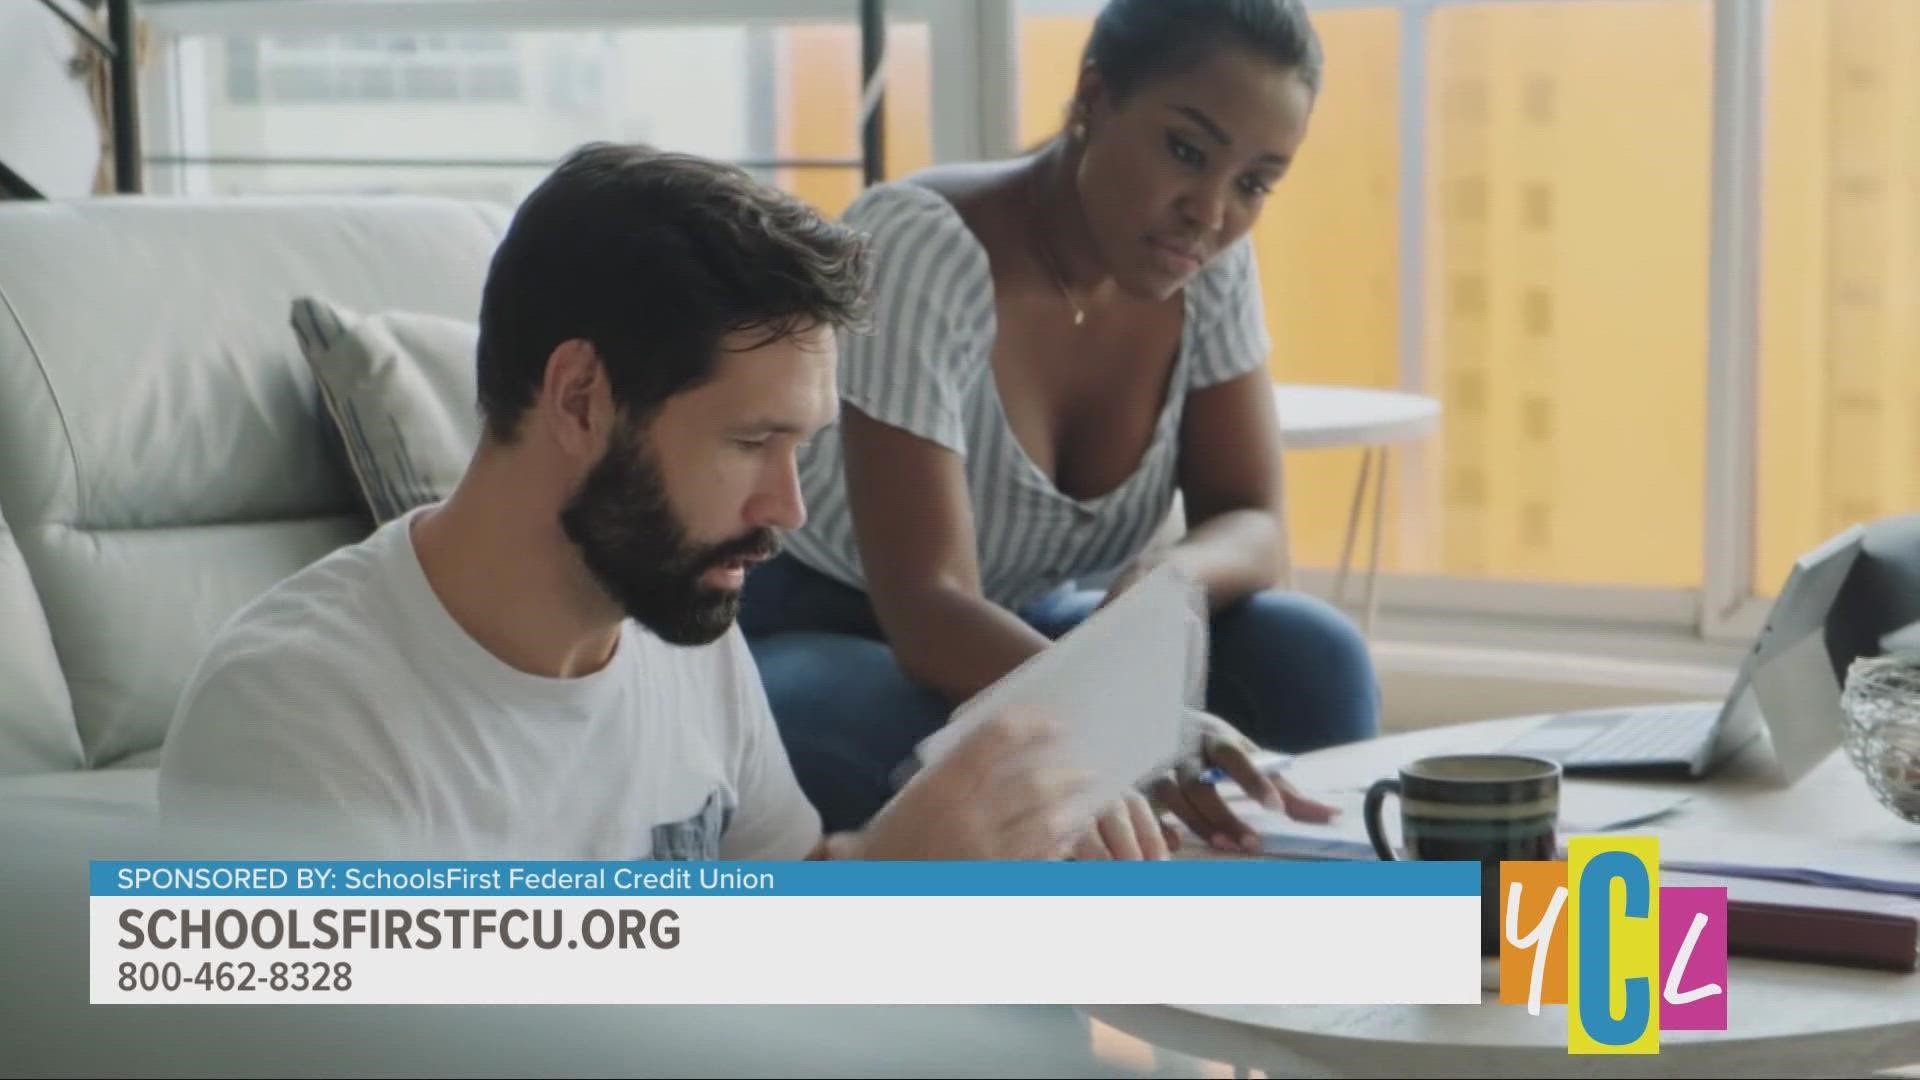 As we close out the year, let’s reflect on how we can better our financial situation going into the New Year. This segment paid for by SchoolsFirst FCU.